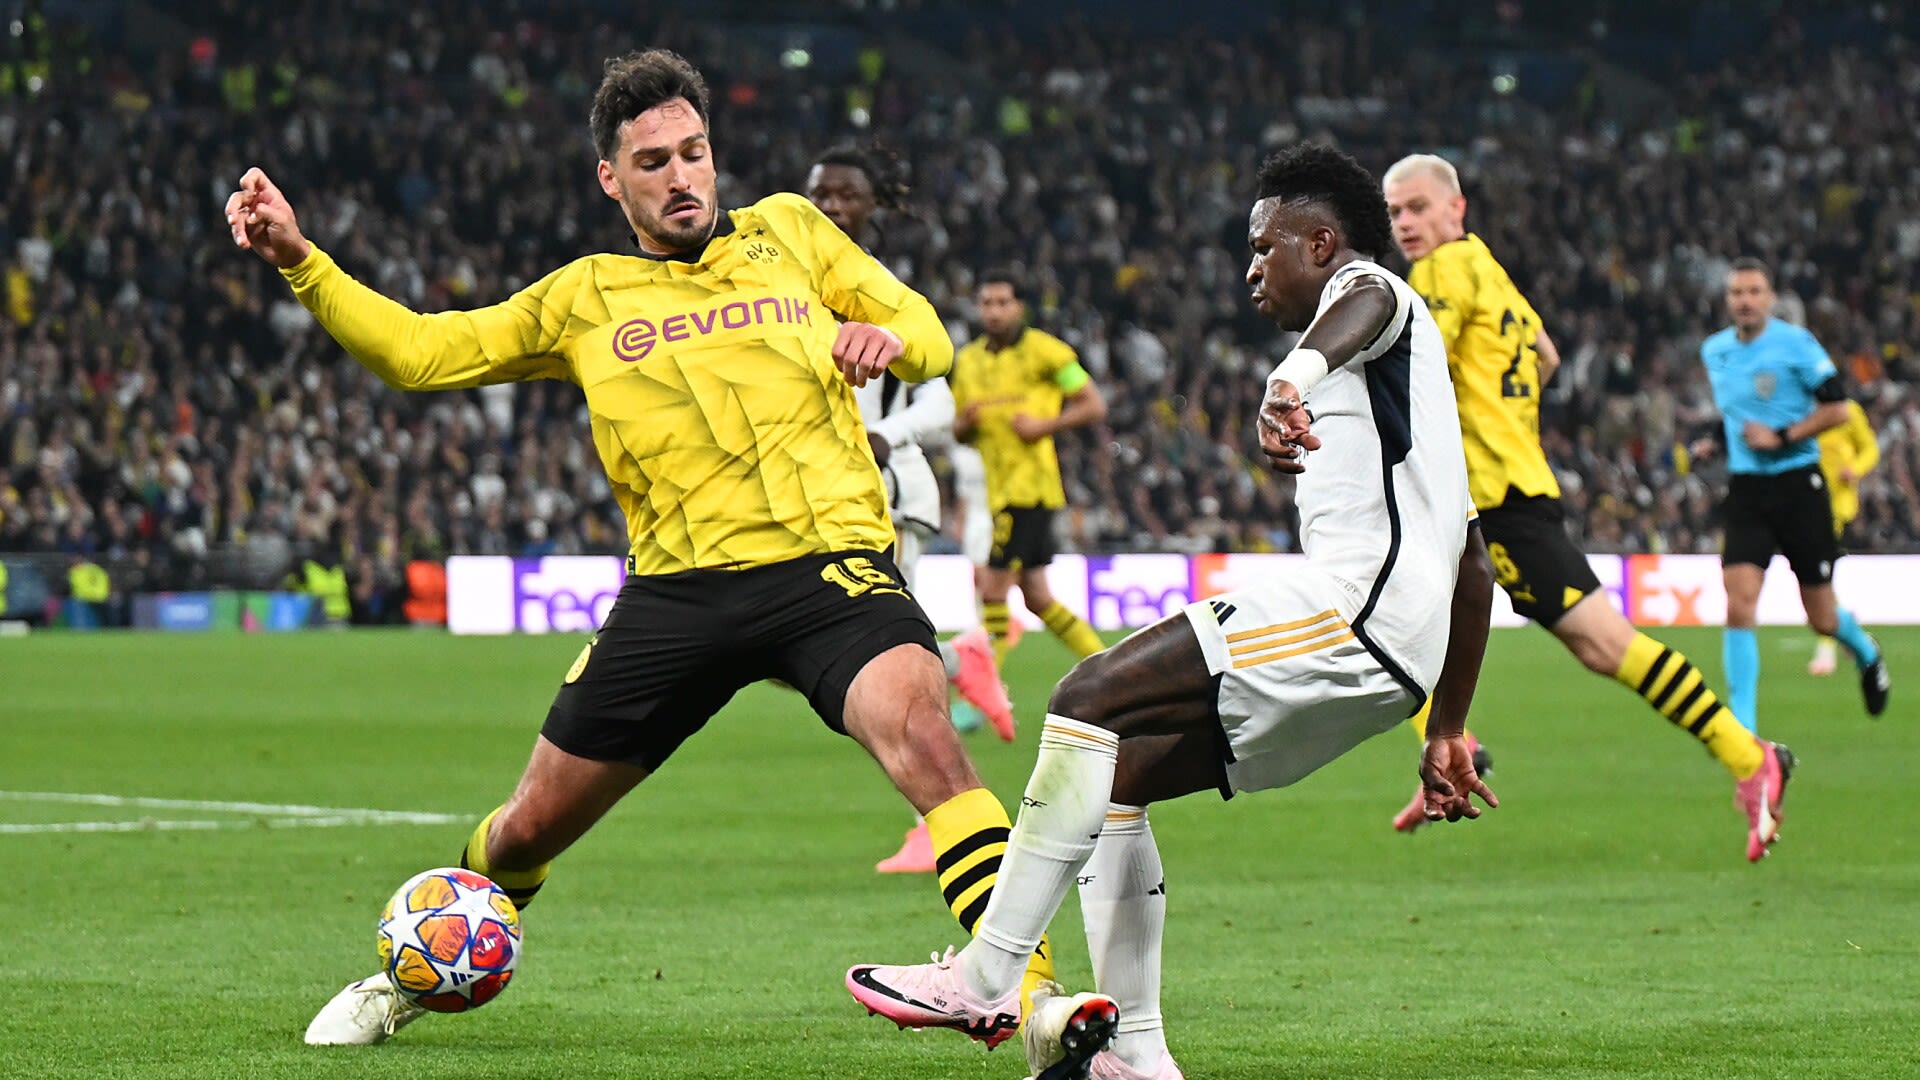 Borussia Dortmund vs Real Madrid player ratings: Superstars shine, in the end